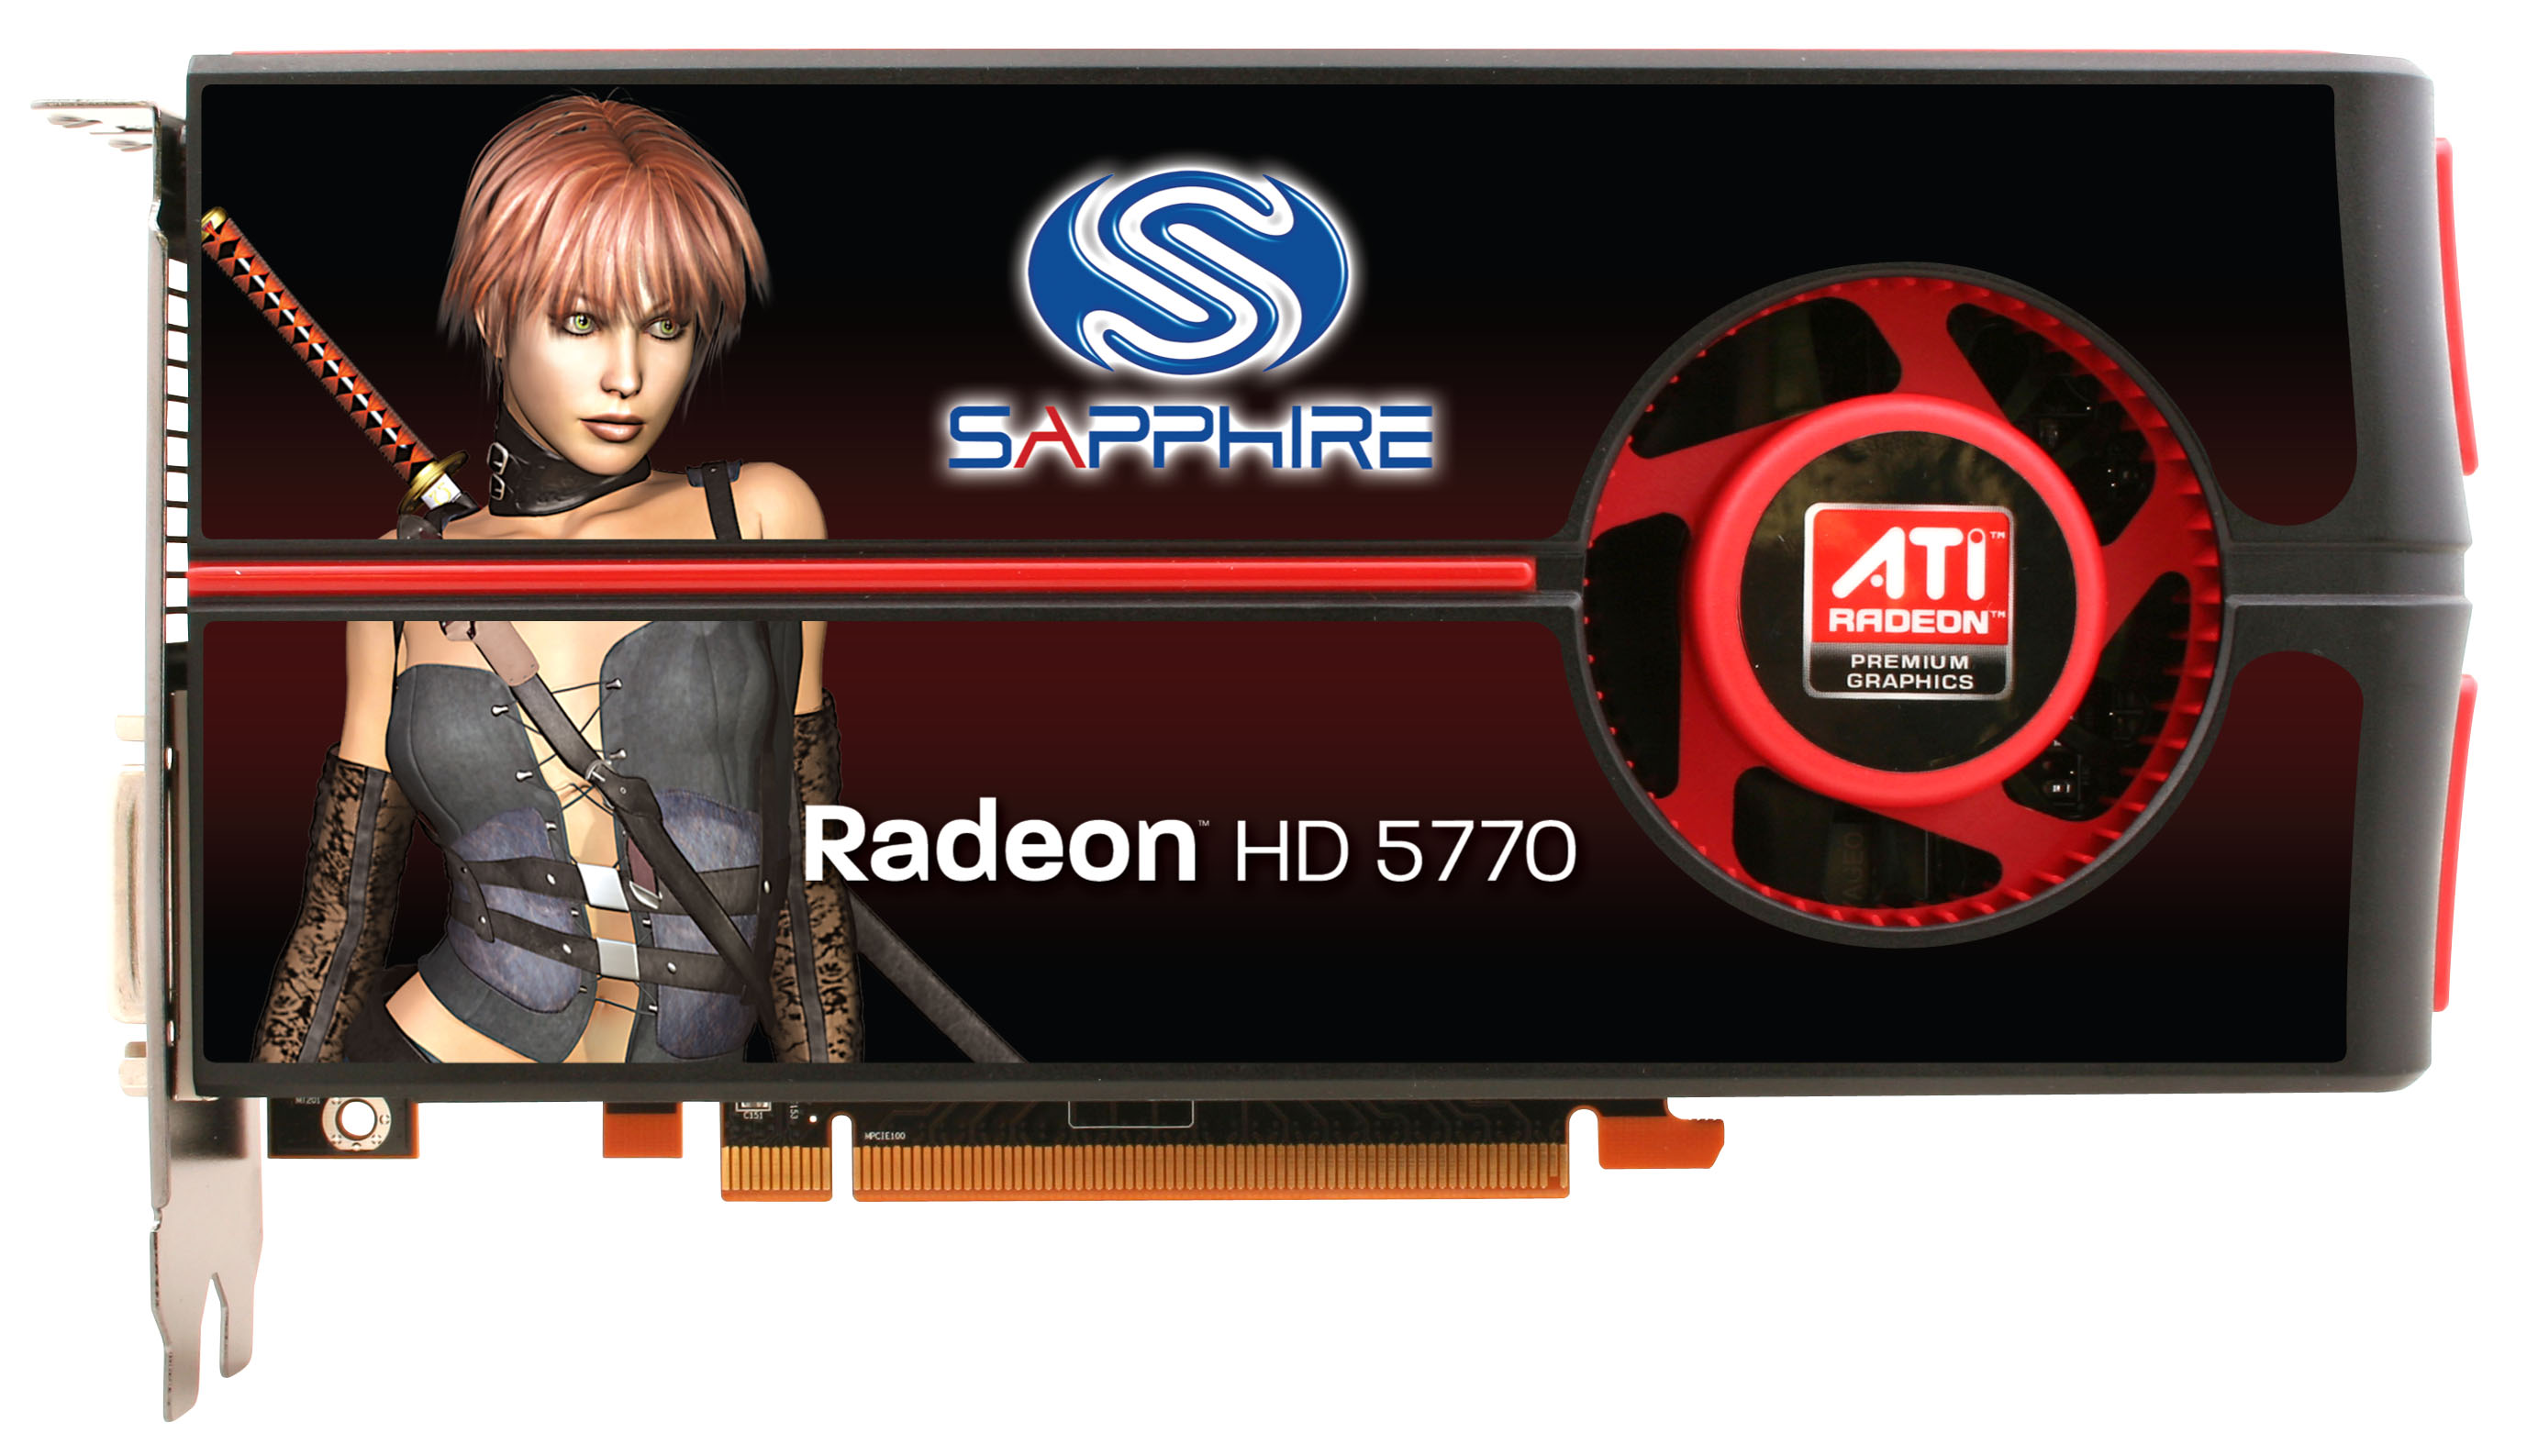 Media asset in full size related to 3dfxzone.it news item entitled as follows: SAPPHIRE lancia le schede grafiche Radeon HD5770 e HD5750 | Image Name: news11678_5.jpg